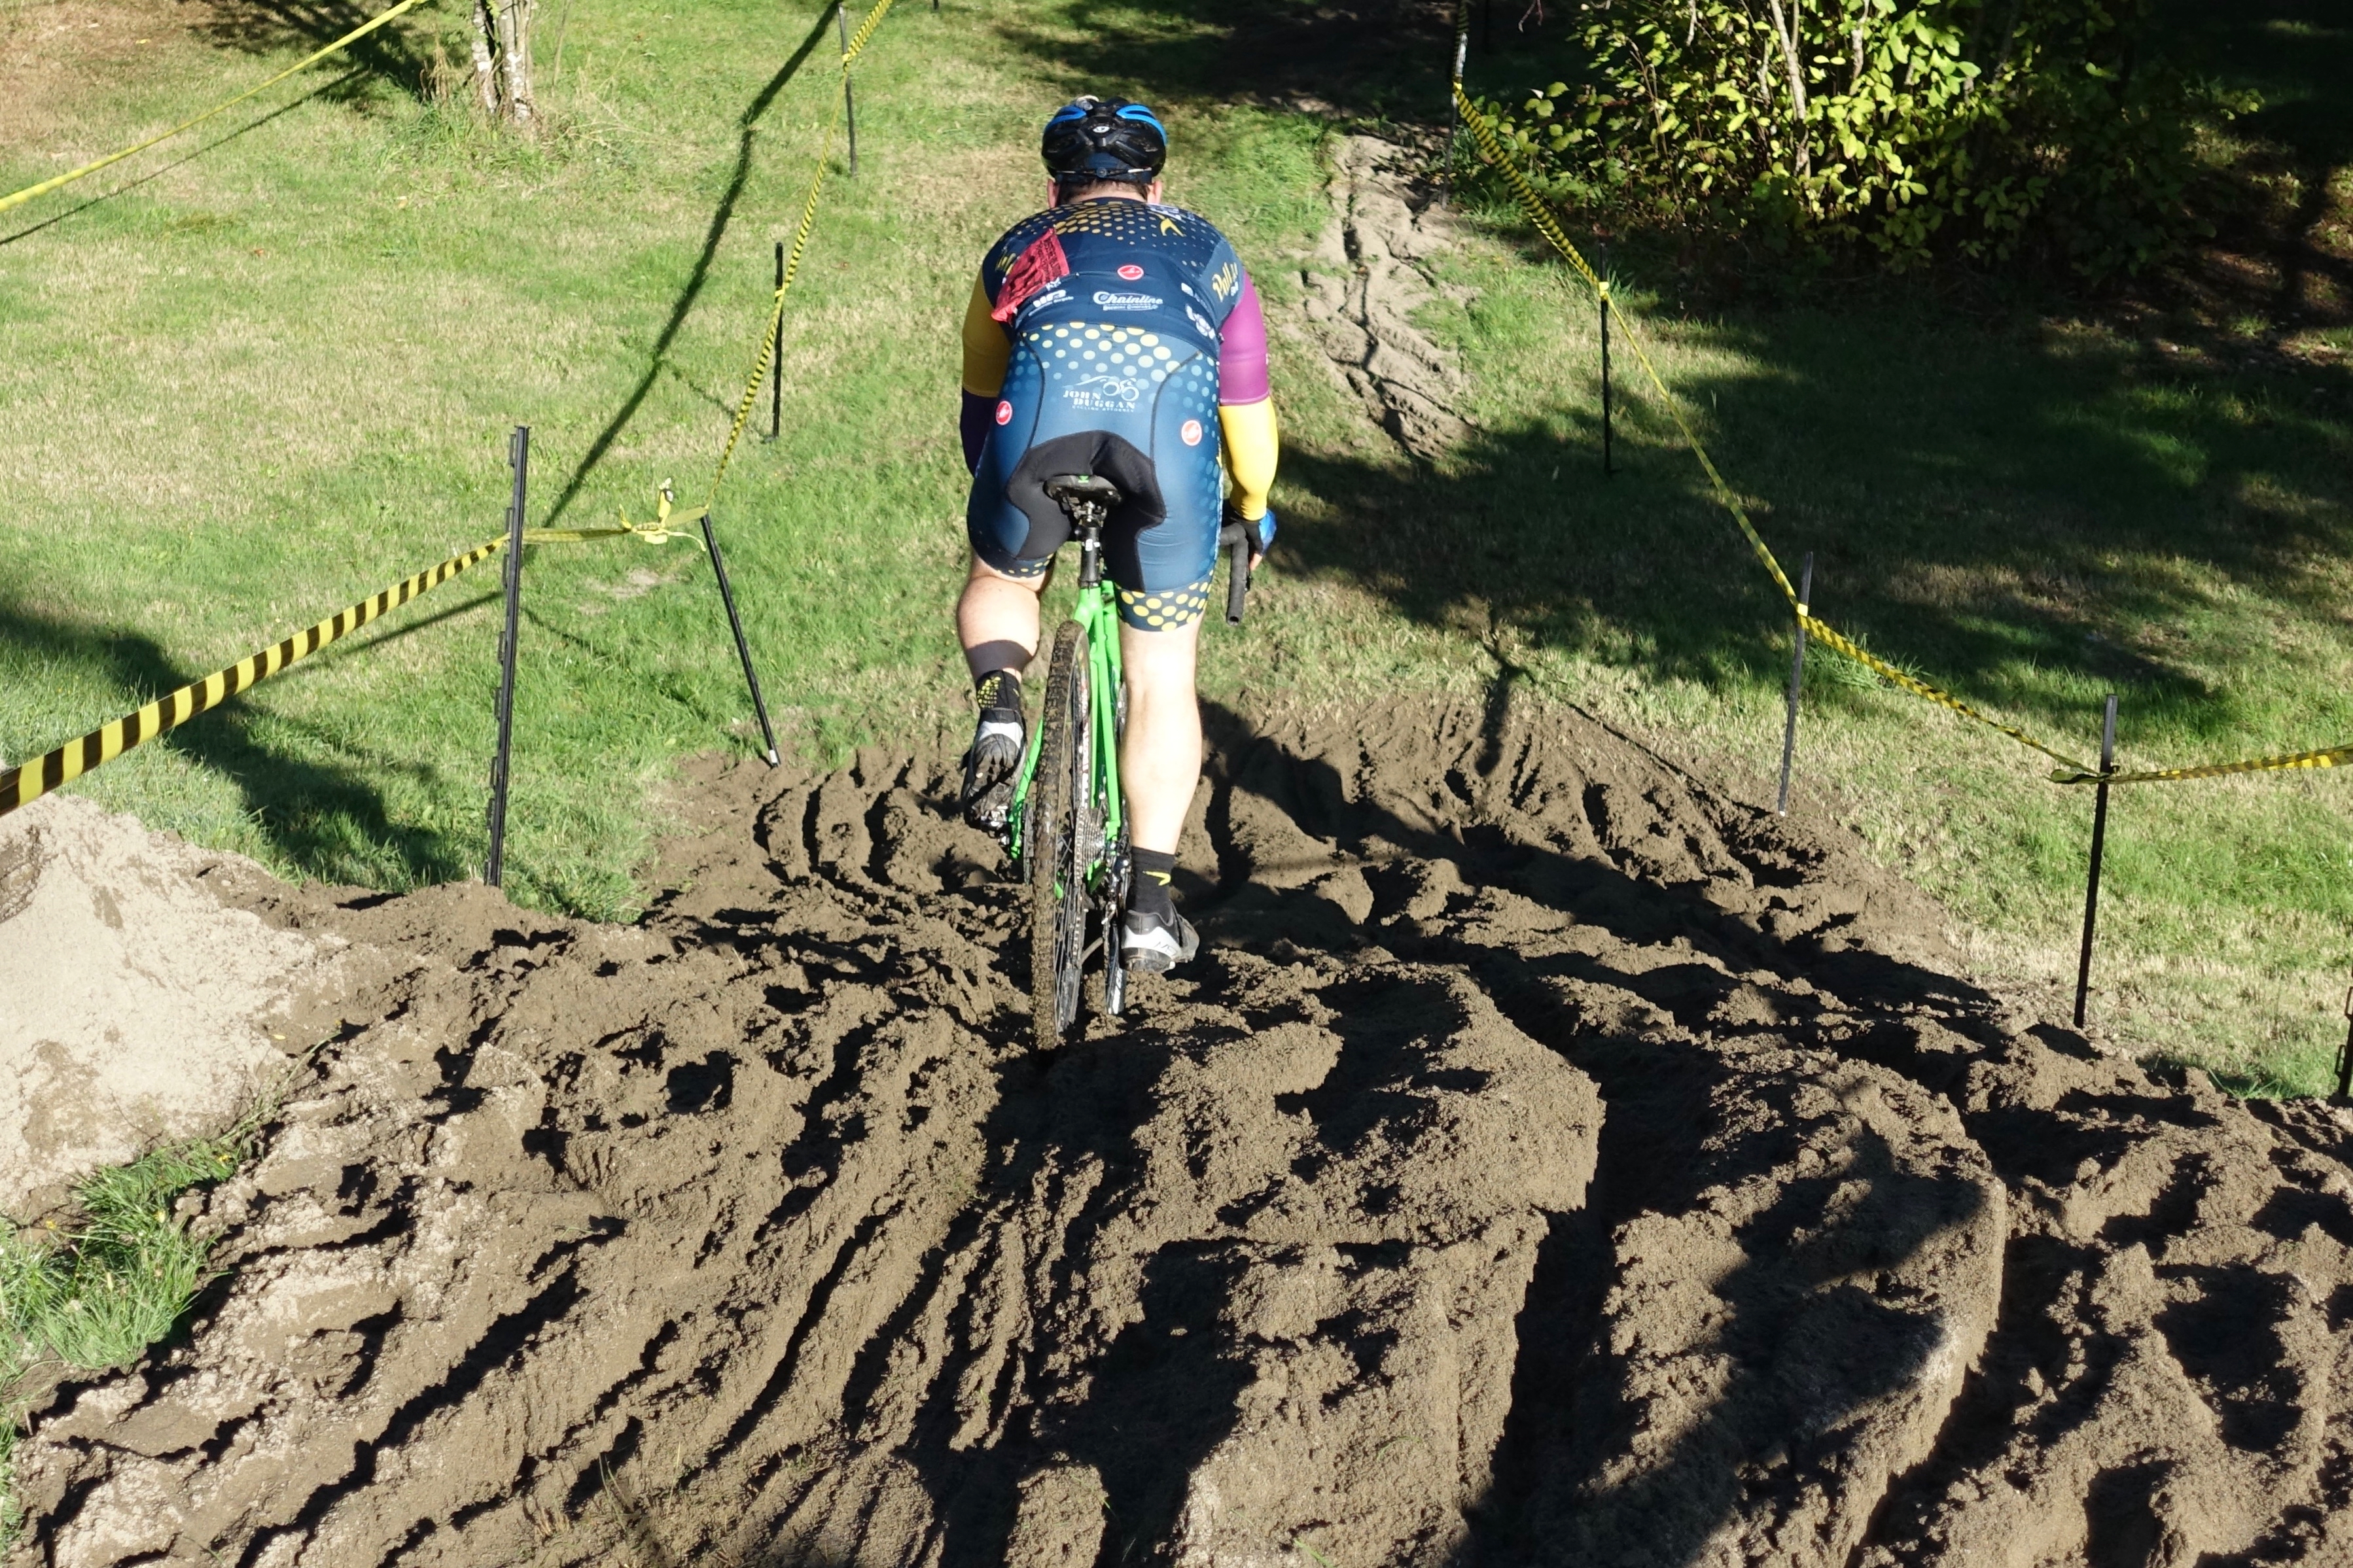 Competitors were challenged with a downhill sand pit.